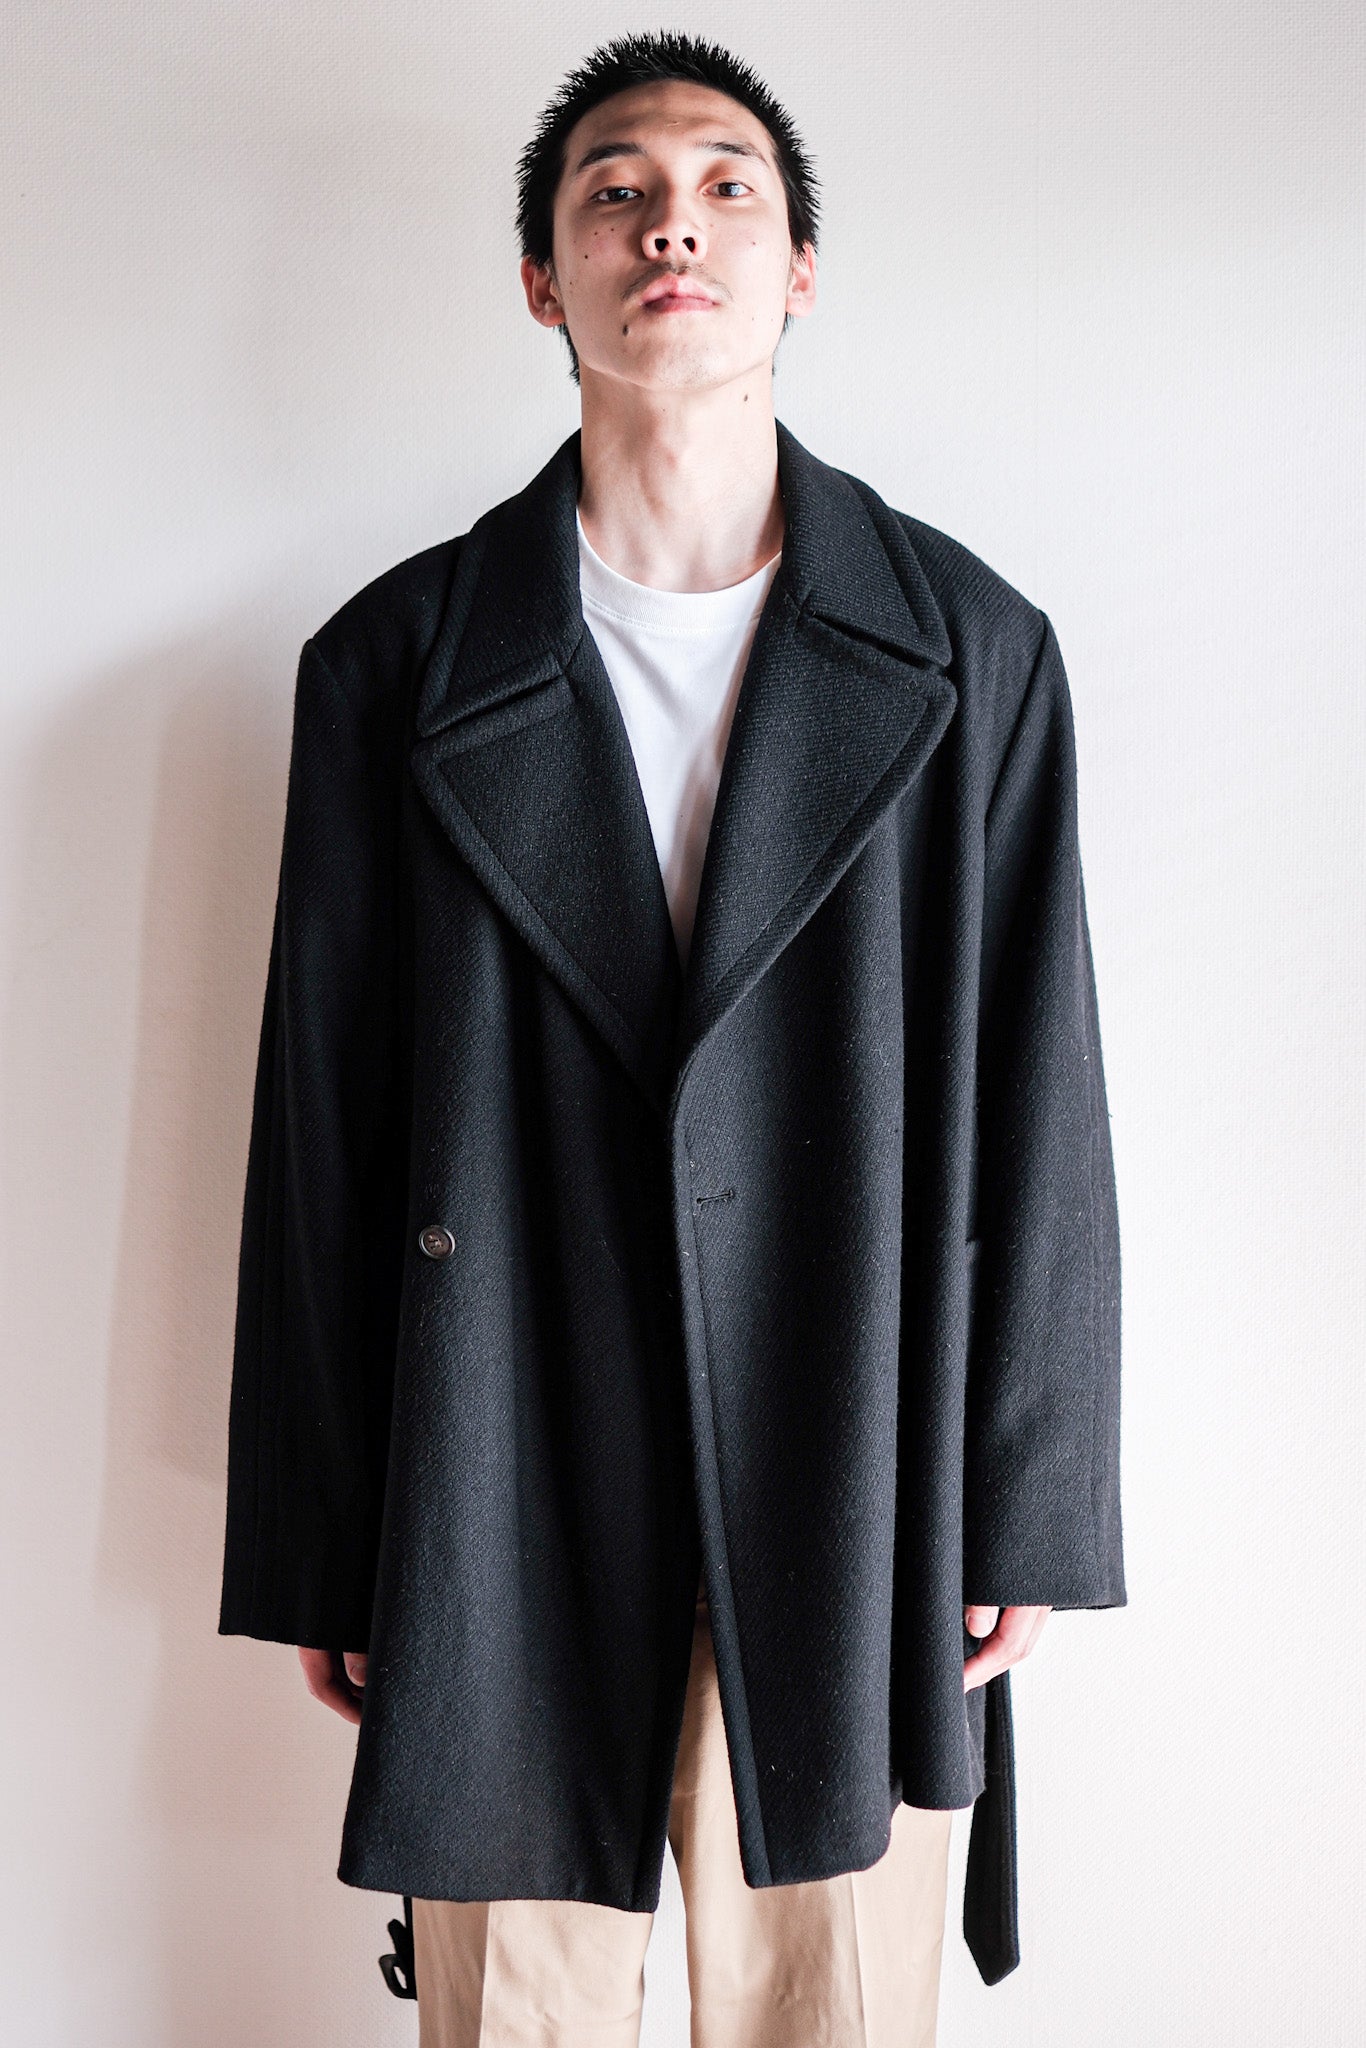 00's] Old Hermès Paris Cashmere Mix Wool Belted COAT by MARTIN MARG